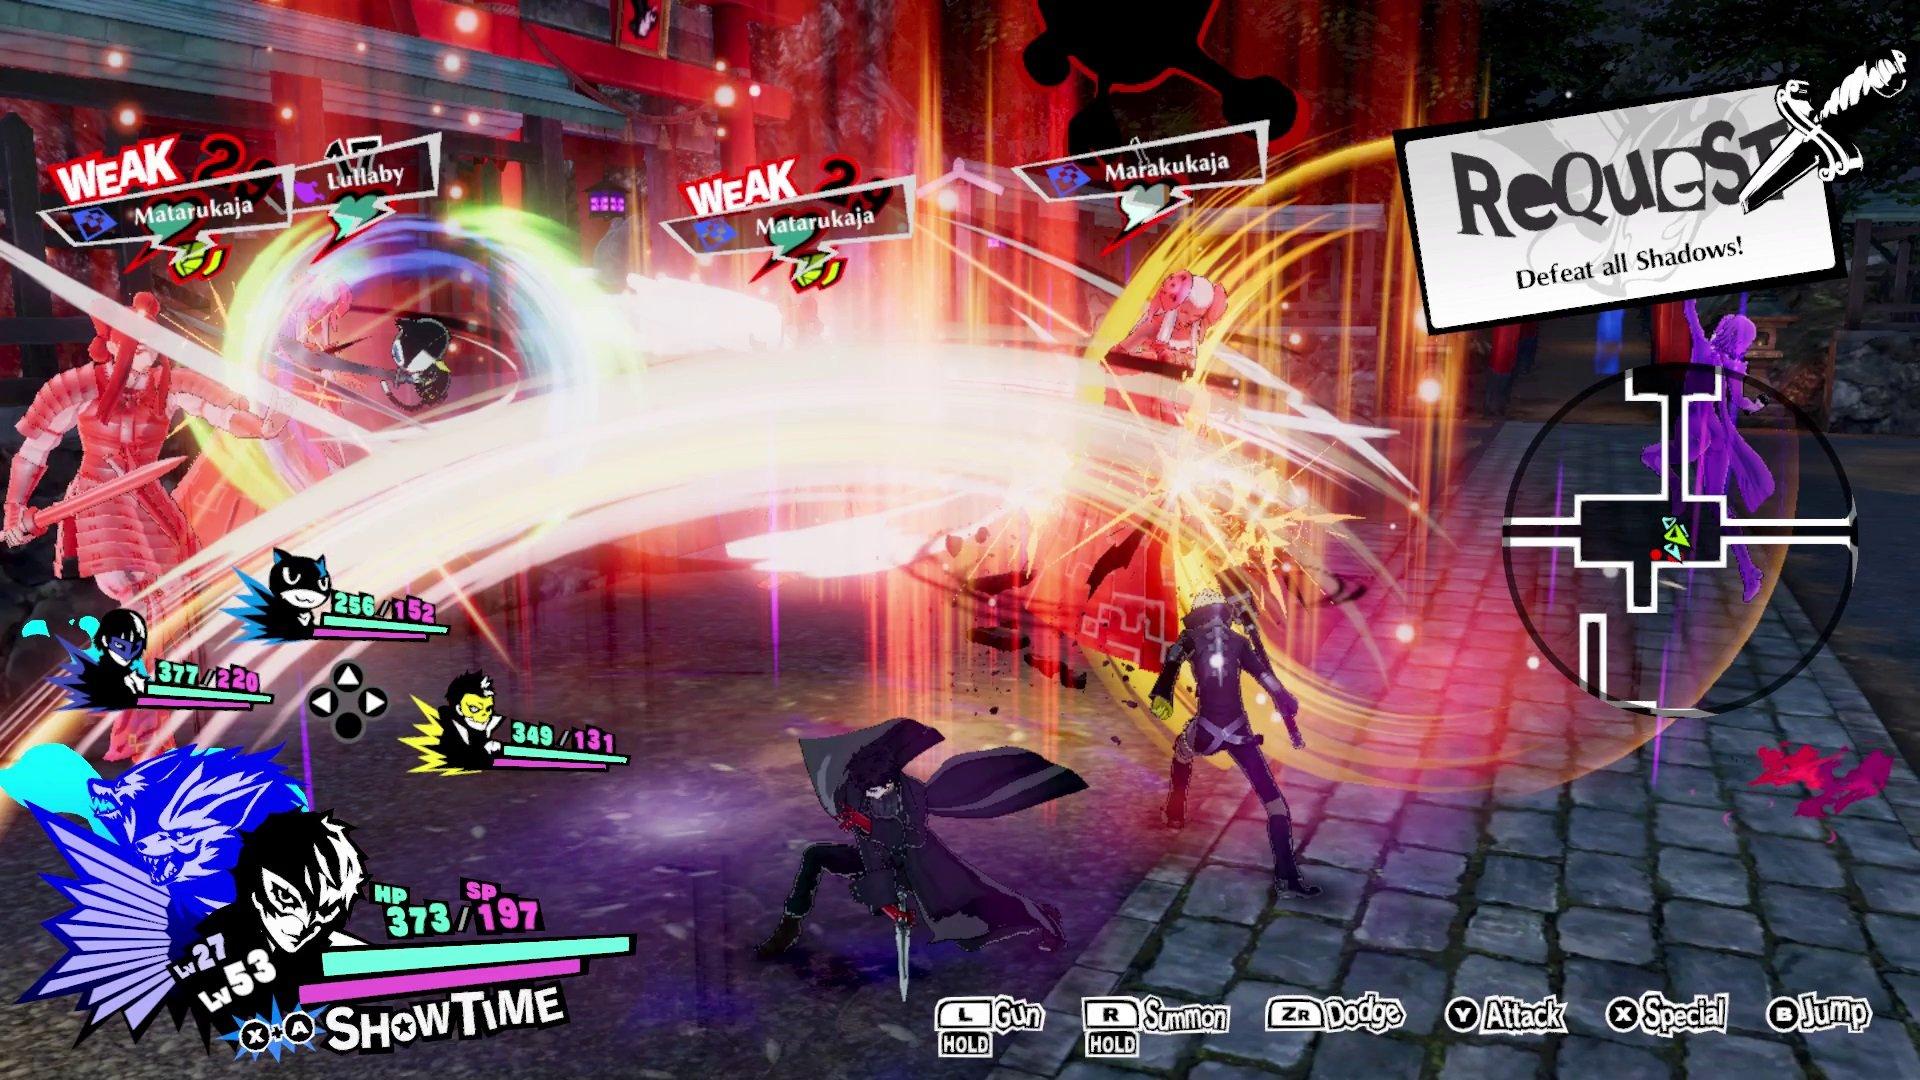 Review] Persona 5 Strikers